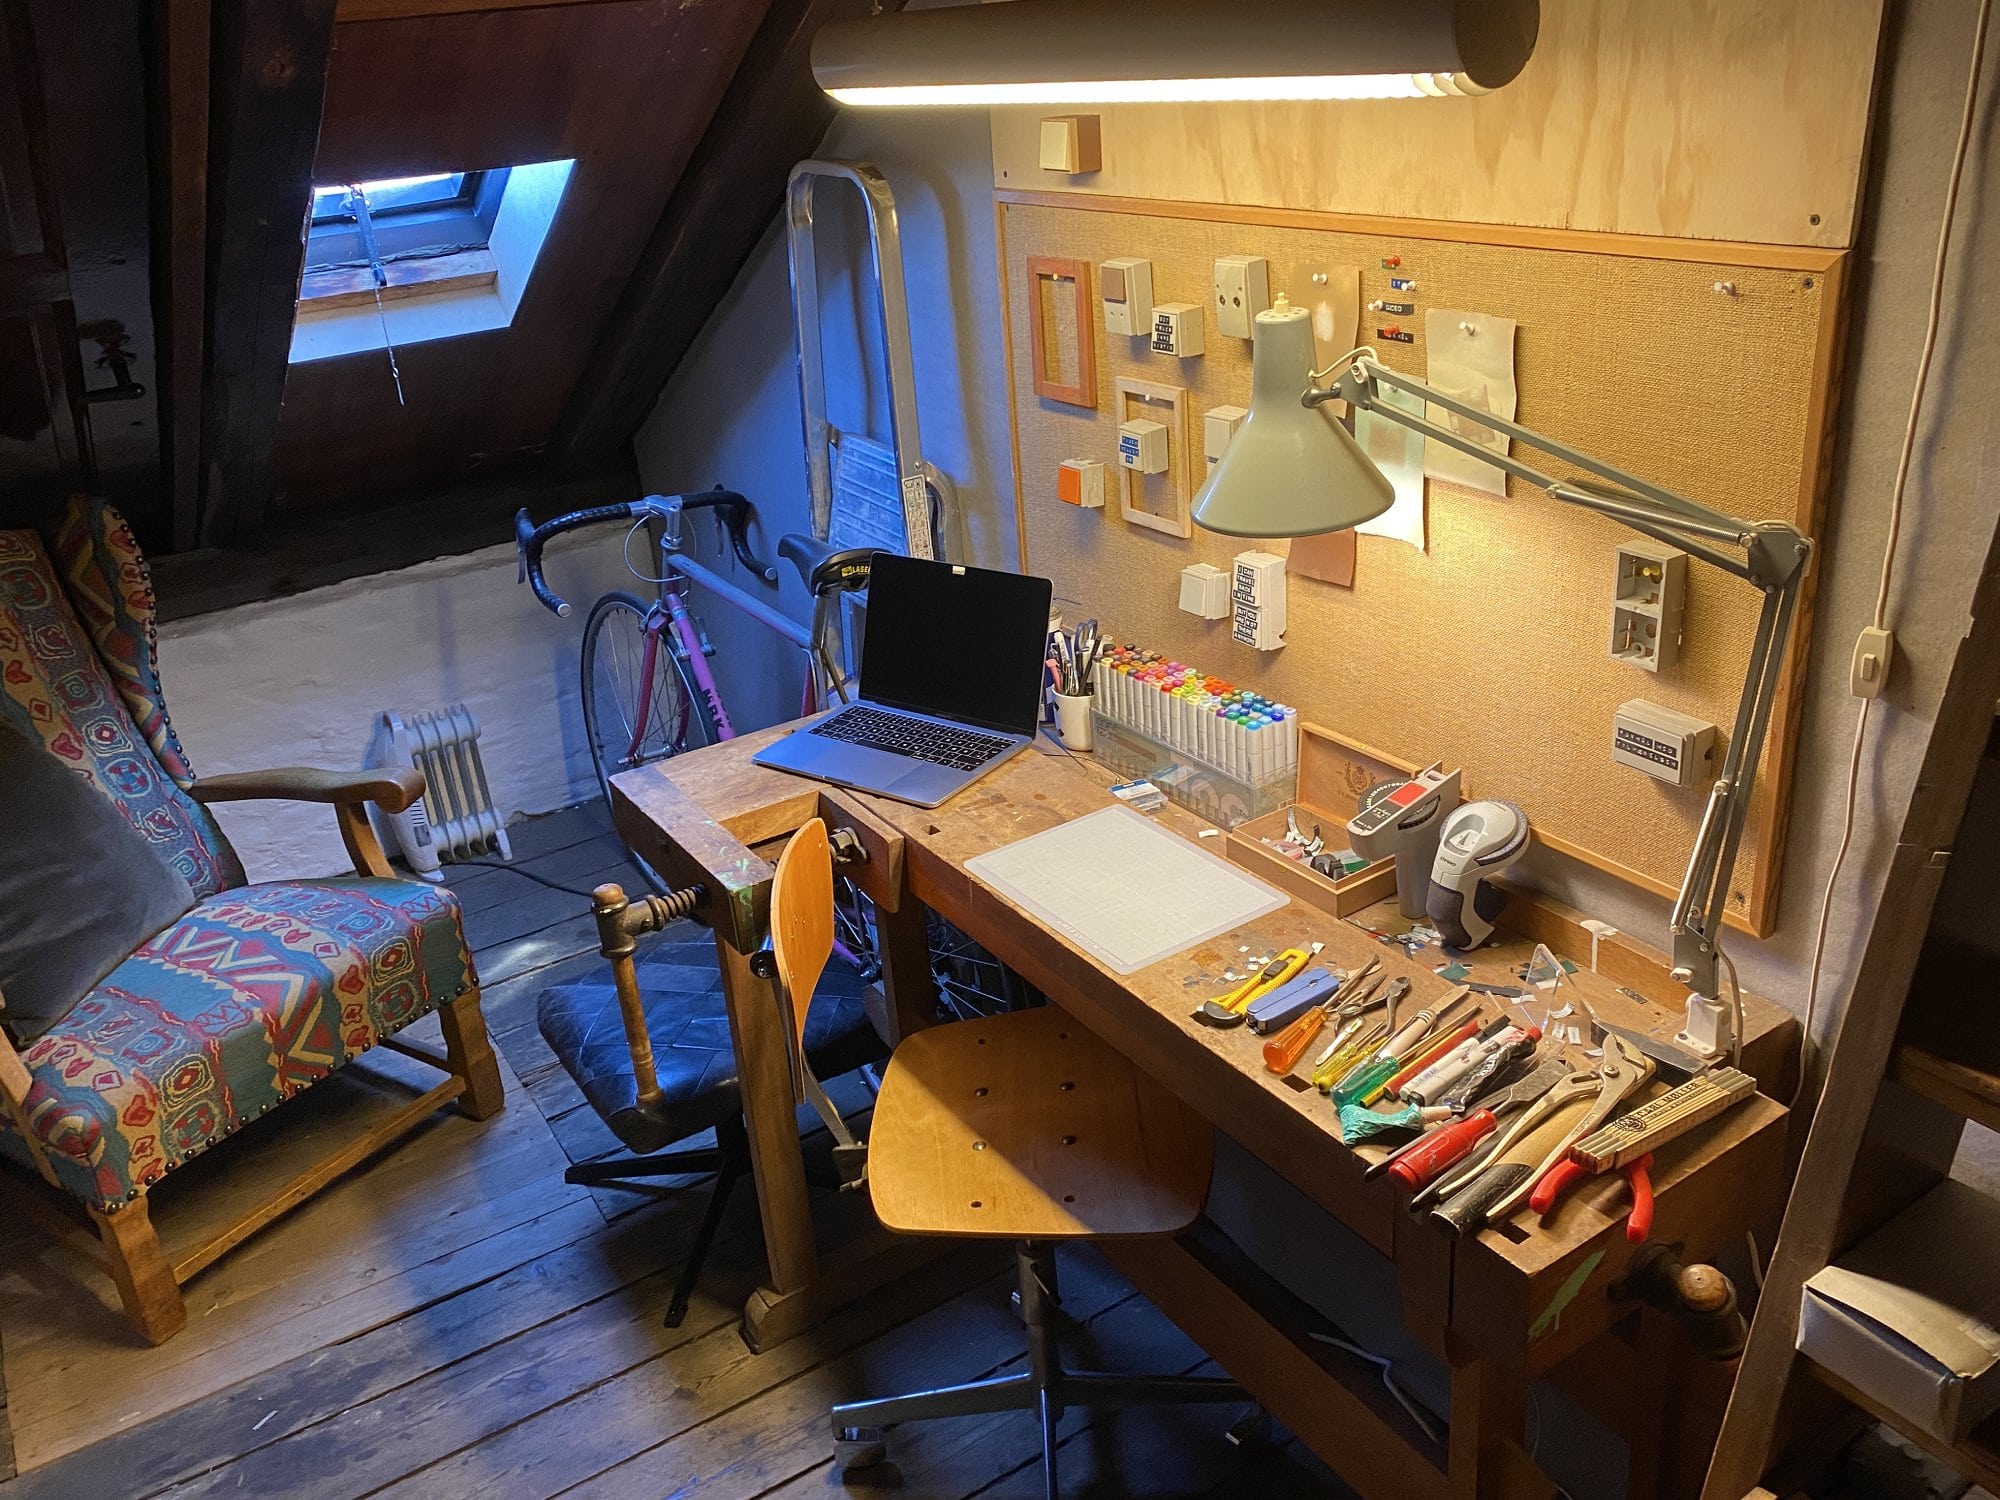 An artistic attic workspace featuring a wooden carpenters bench desk from 1980s and a cosy vintage chair